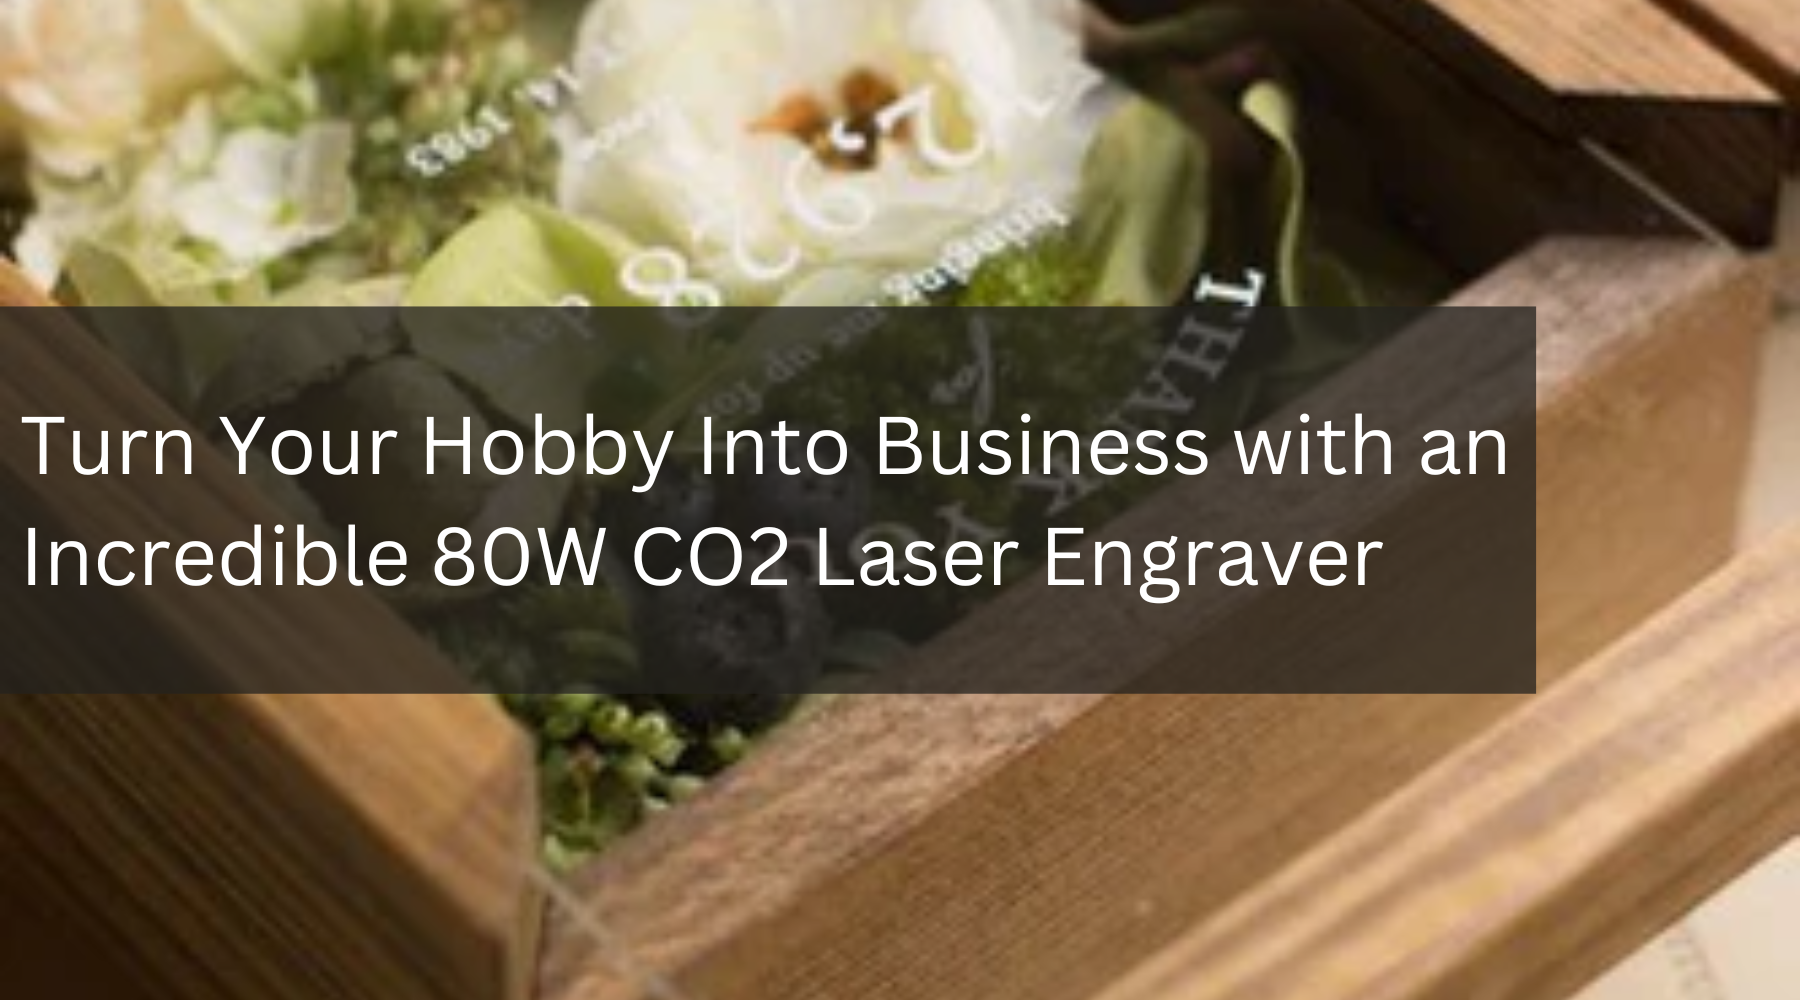 Turn Your Hobby Into Business with an Incredible 80W CO2 Laser Engraver